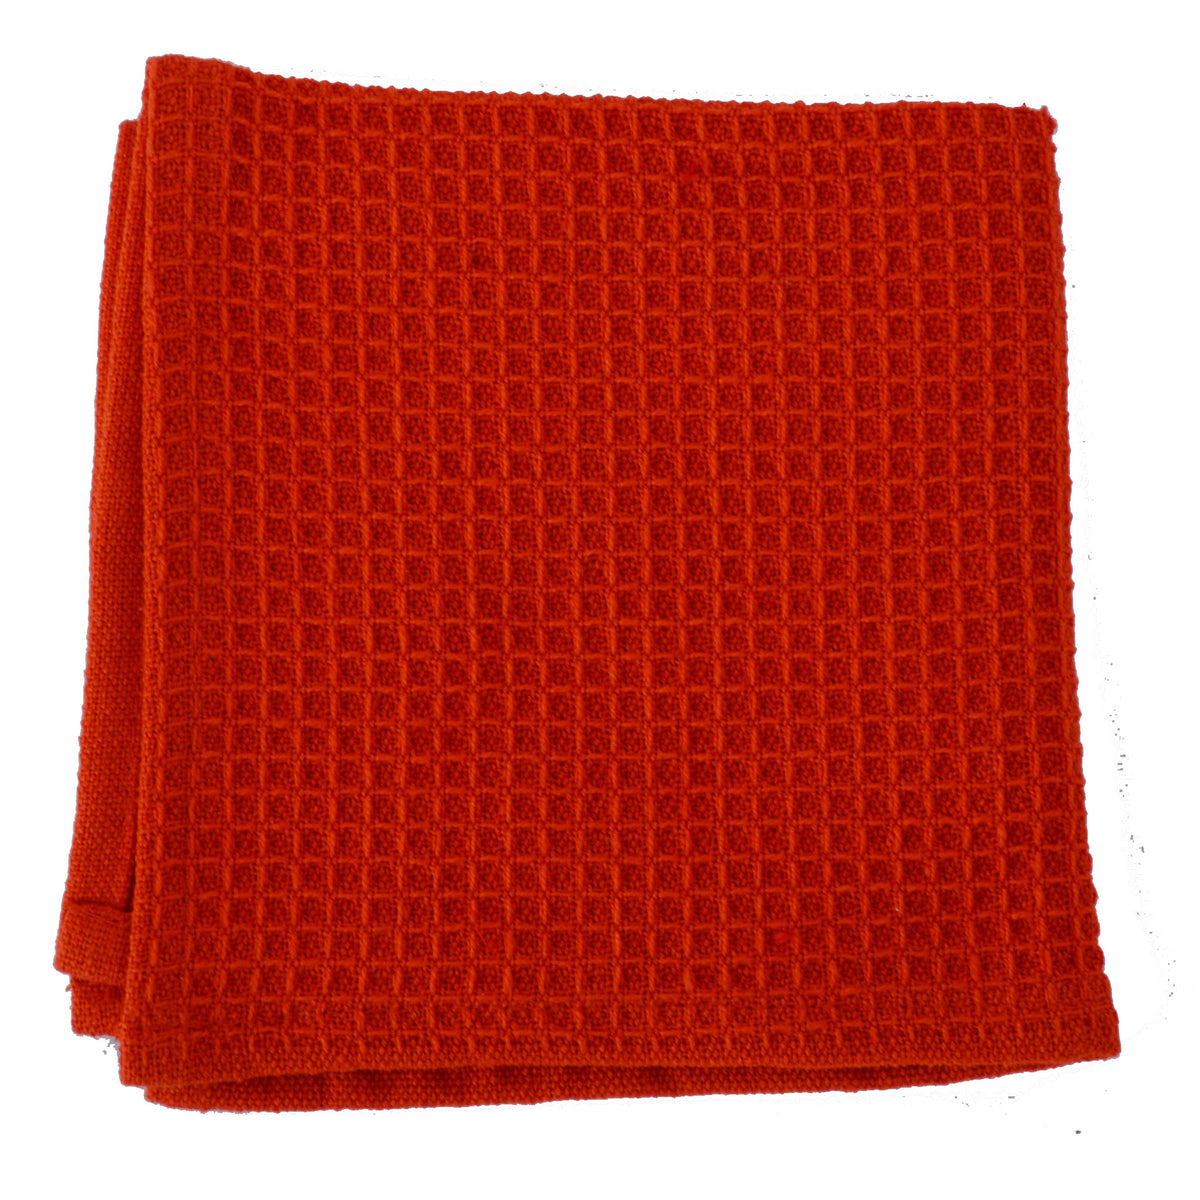 100% Cotton Flat Waffle Dish Cloths For Washing Dishes, 12x13, 4-Pack, Red